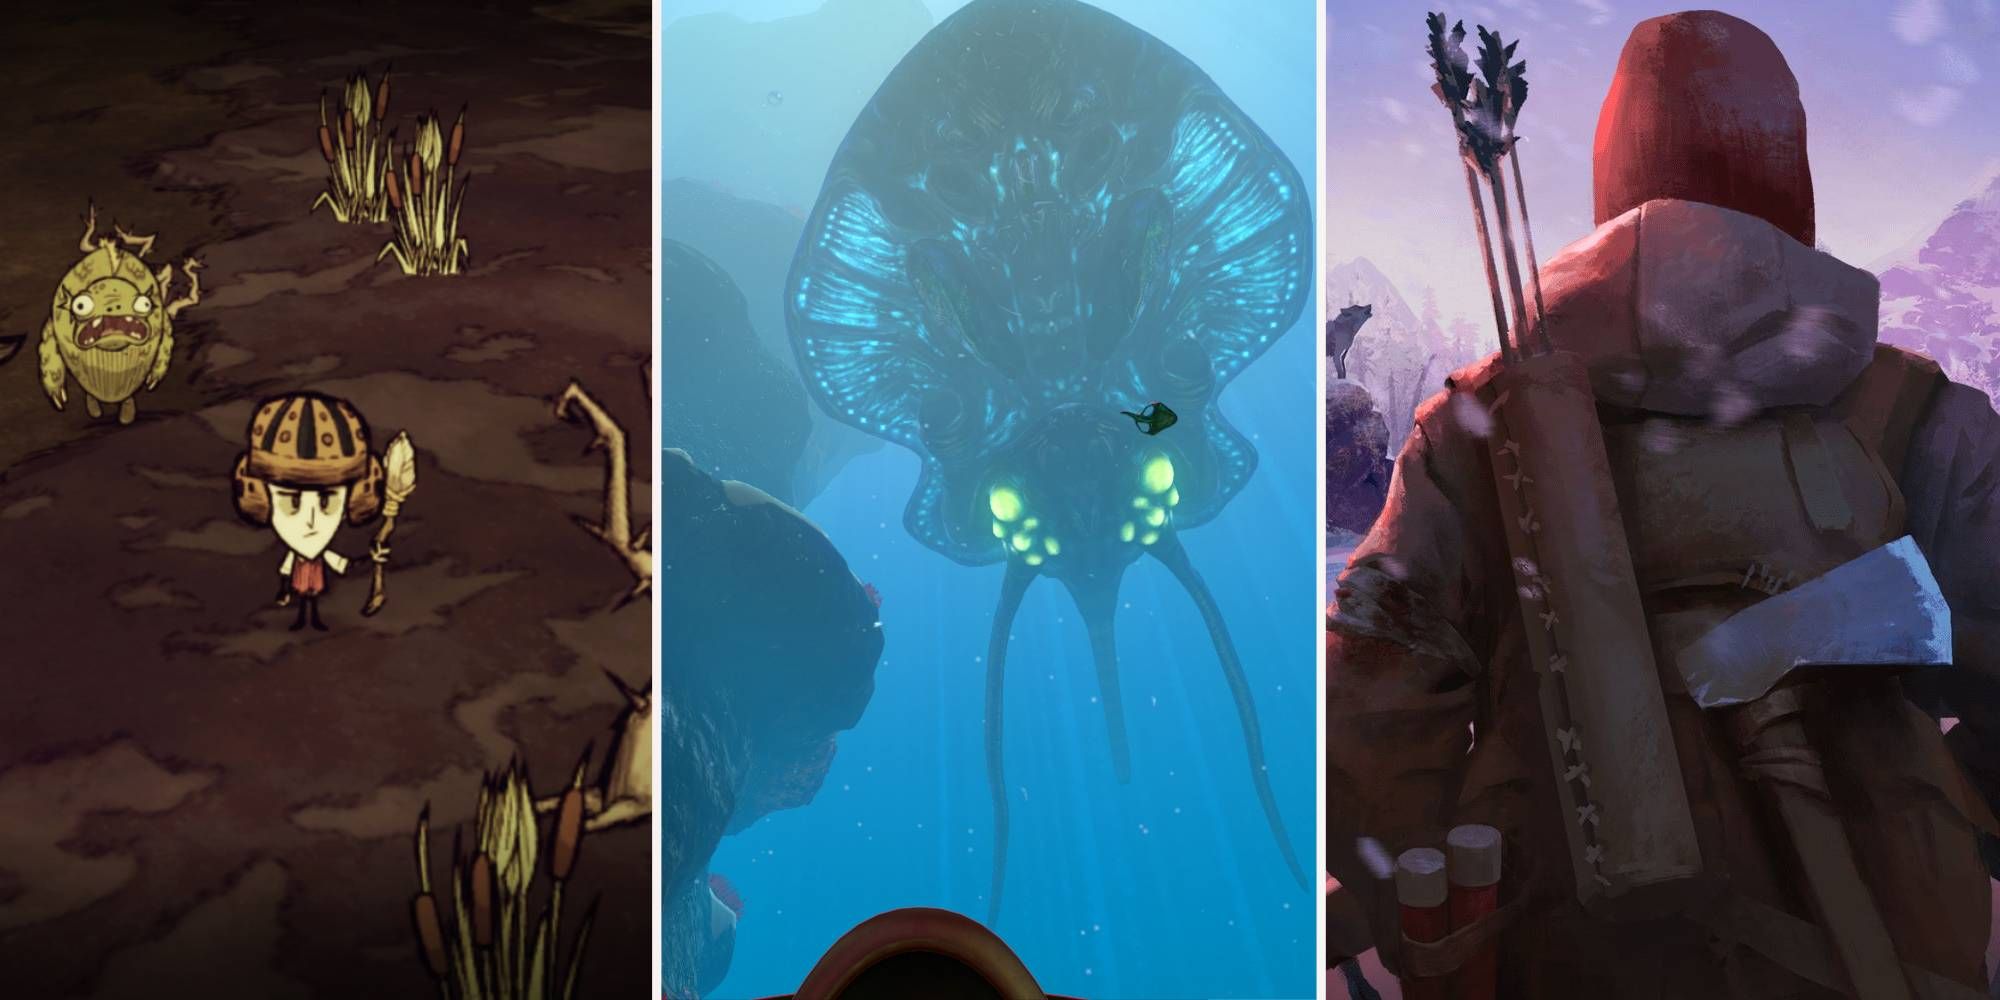 A split image of Don't Starve, Subnautica, and The Long Dark